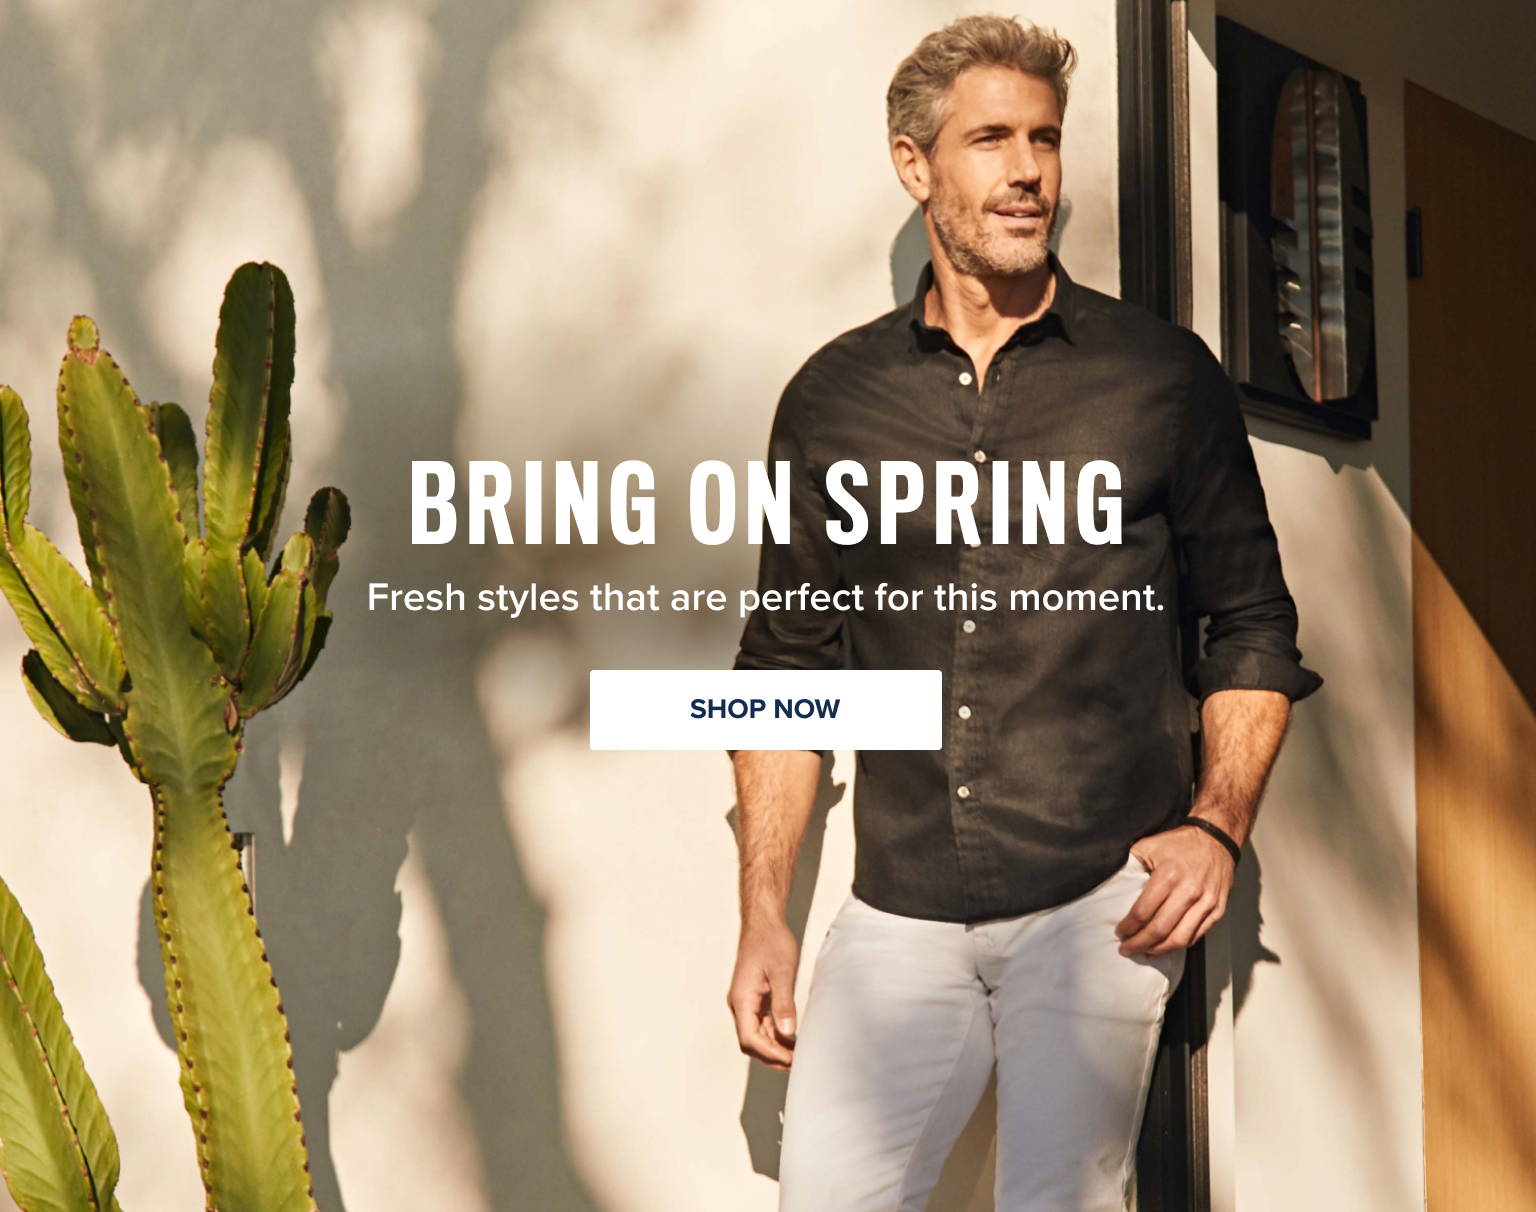 Bring on spring — Fresh styles that are perfect for this moment.